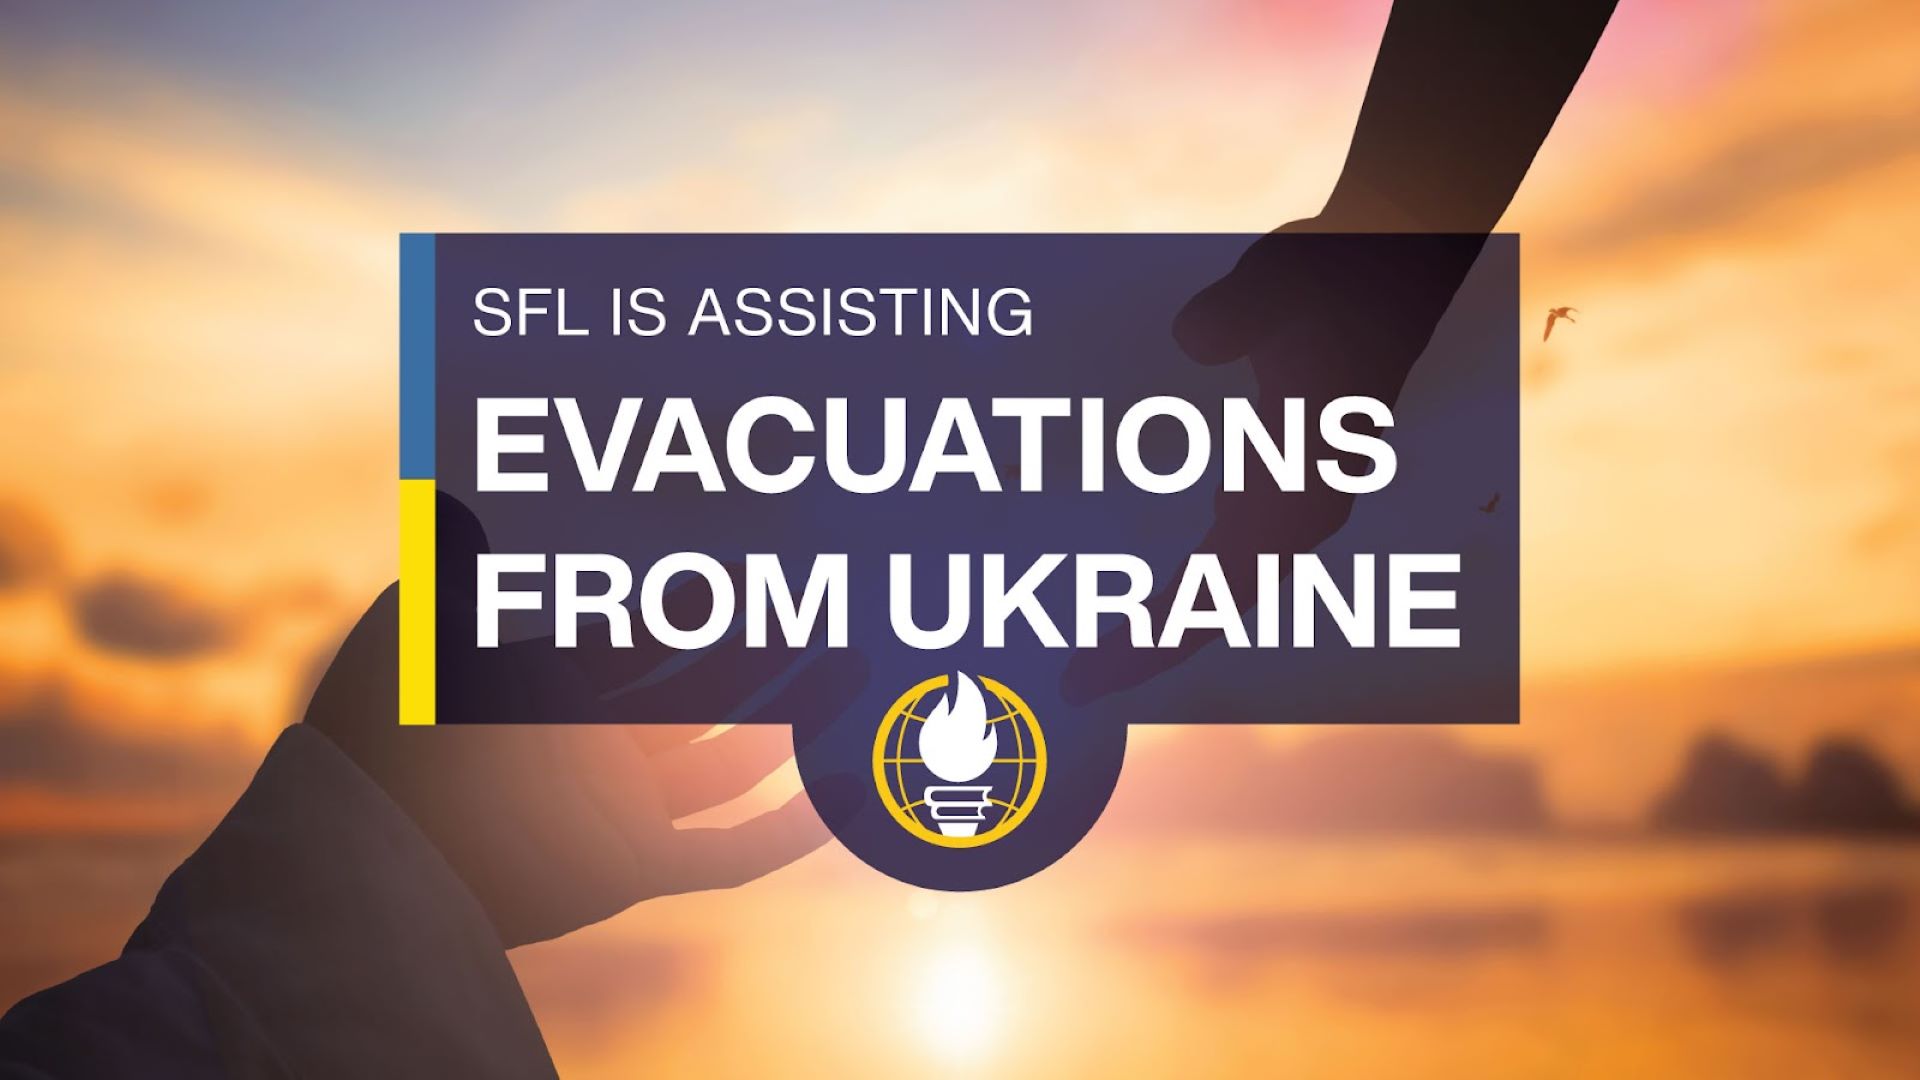 Putin's war of aggression against Ukraine has created a humanitarian crisis. As such, SFL volunteers and alumni seek to assist with evacuations.